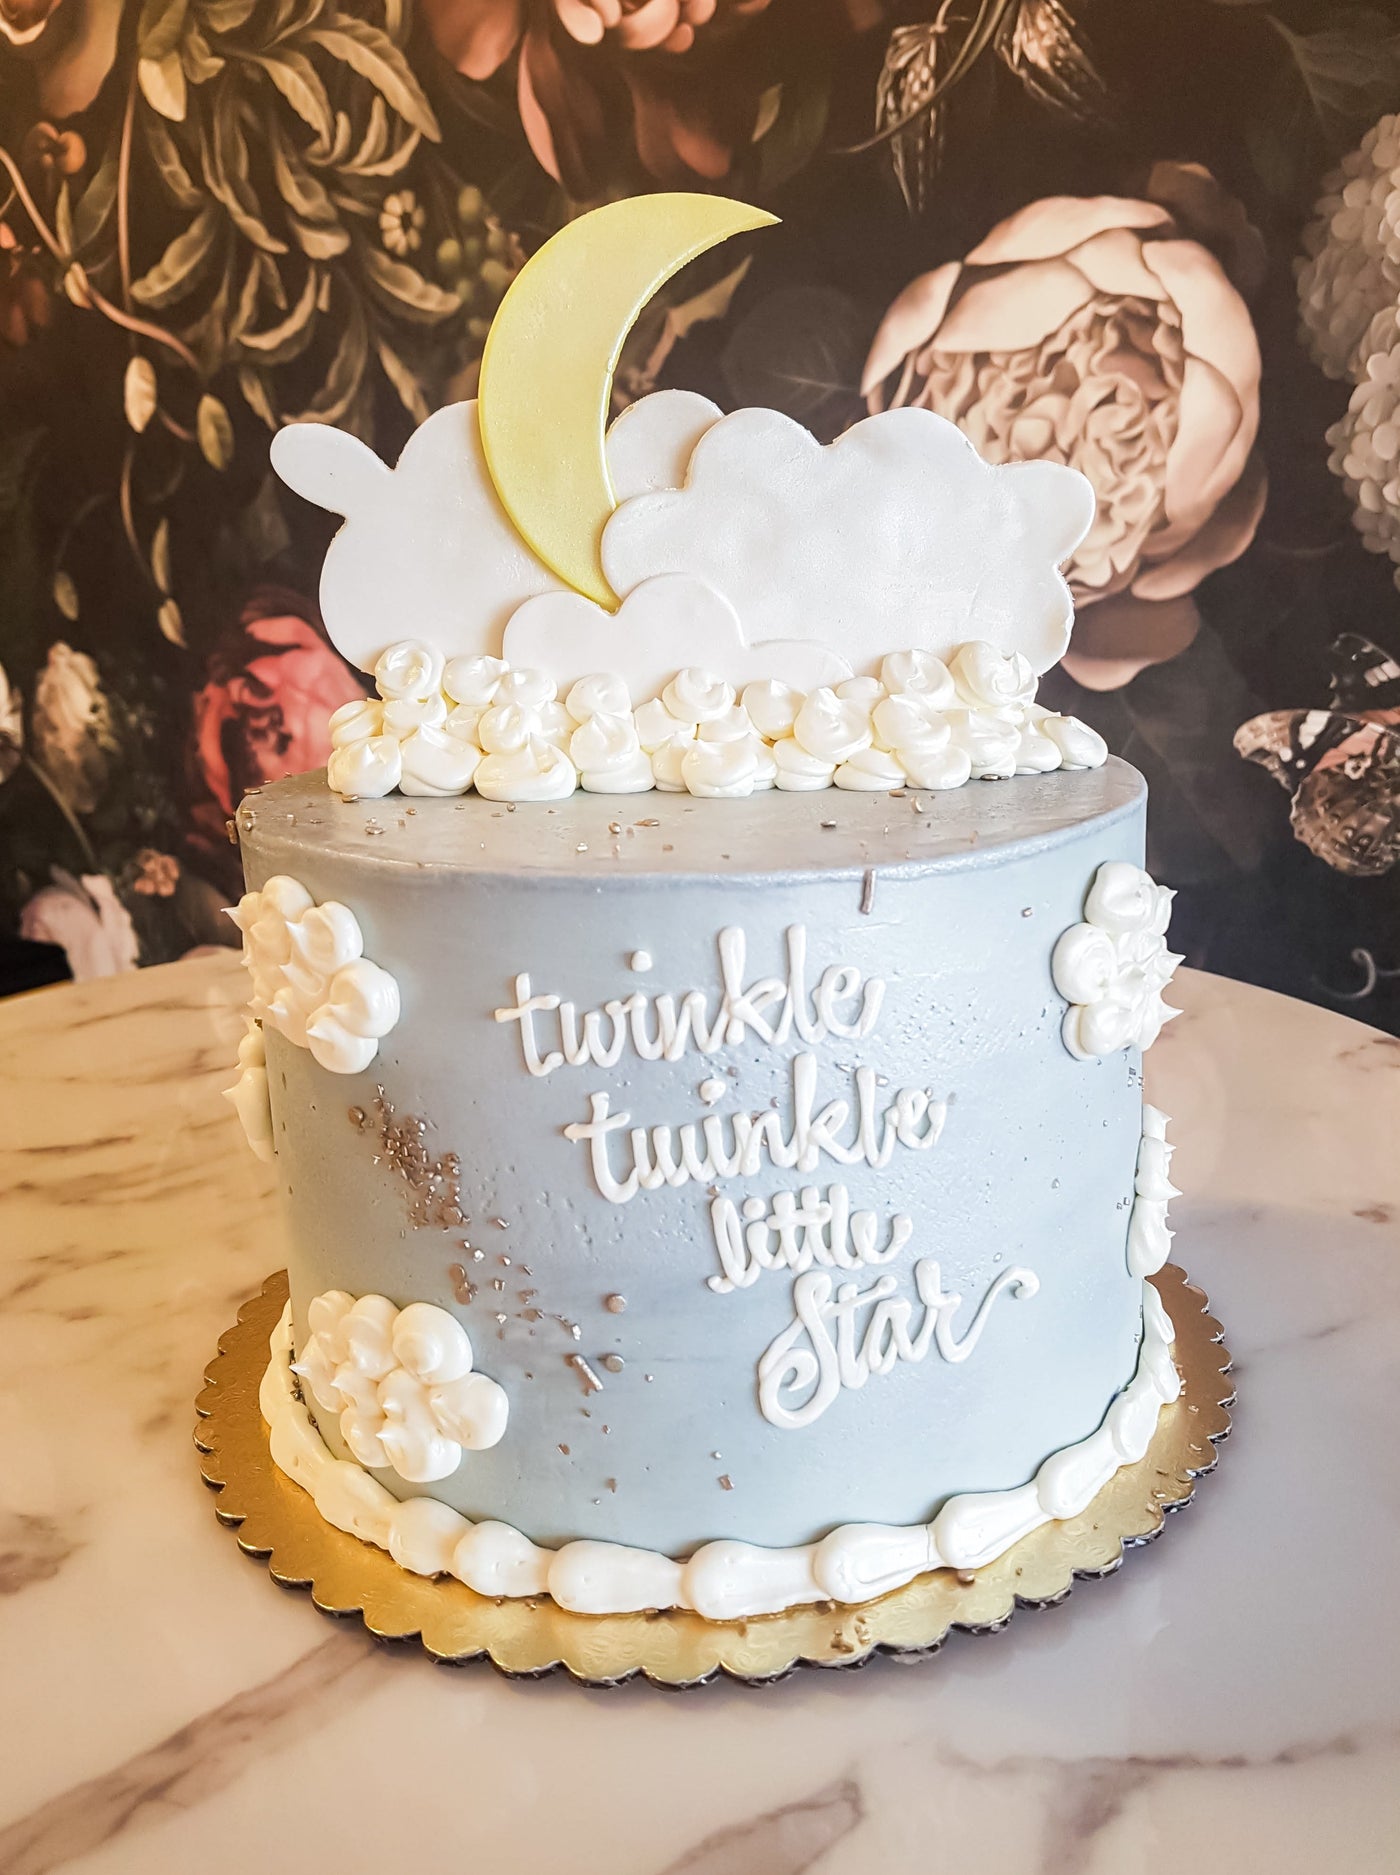 How I wonder what you are. Elevate your baby party with this sweet cake. Whether you are welcoming a little one soon or already celebrating the first birthday! This cake is sure to twinkle and sparkle at your celebration. 